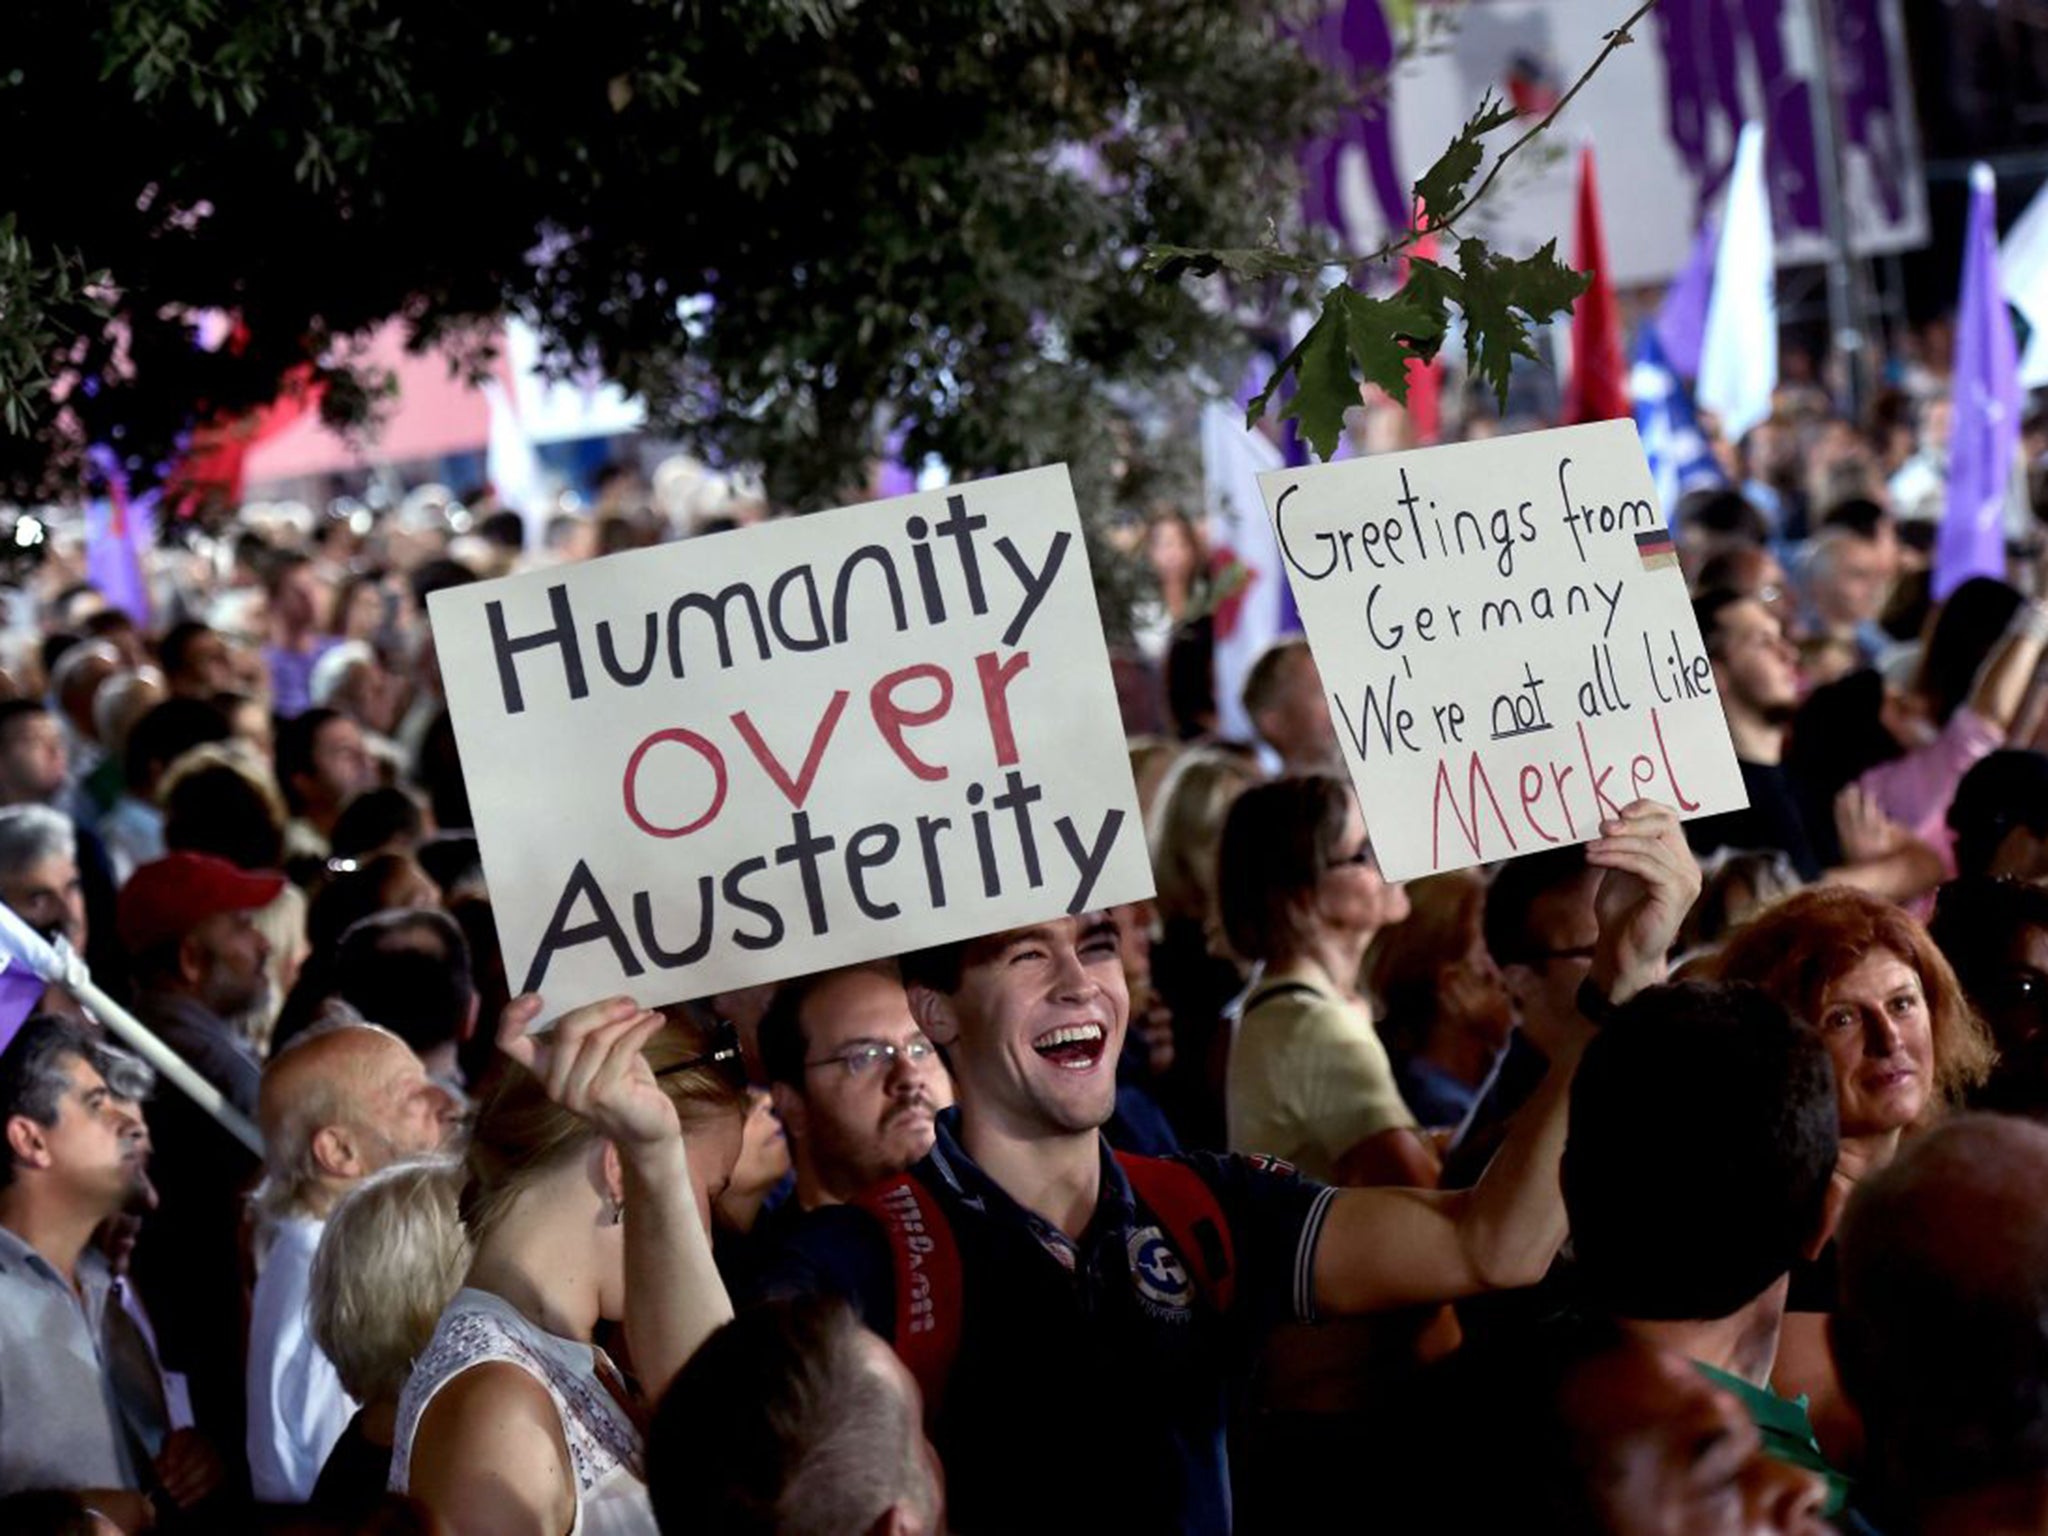 Demonstrators at a rally in support of the Syriza party in Syntagma Square, Athens ahead of the upcoming election